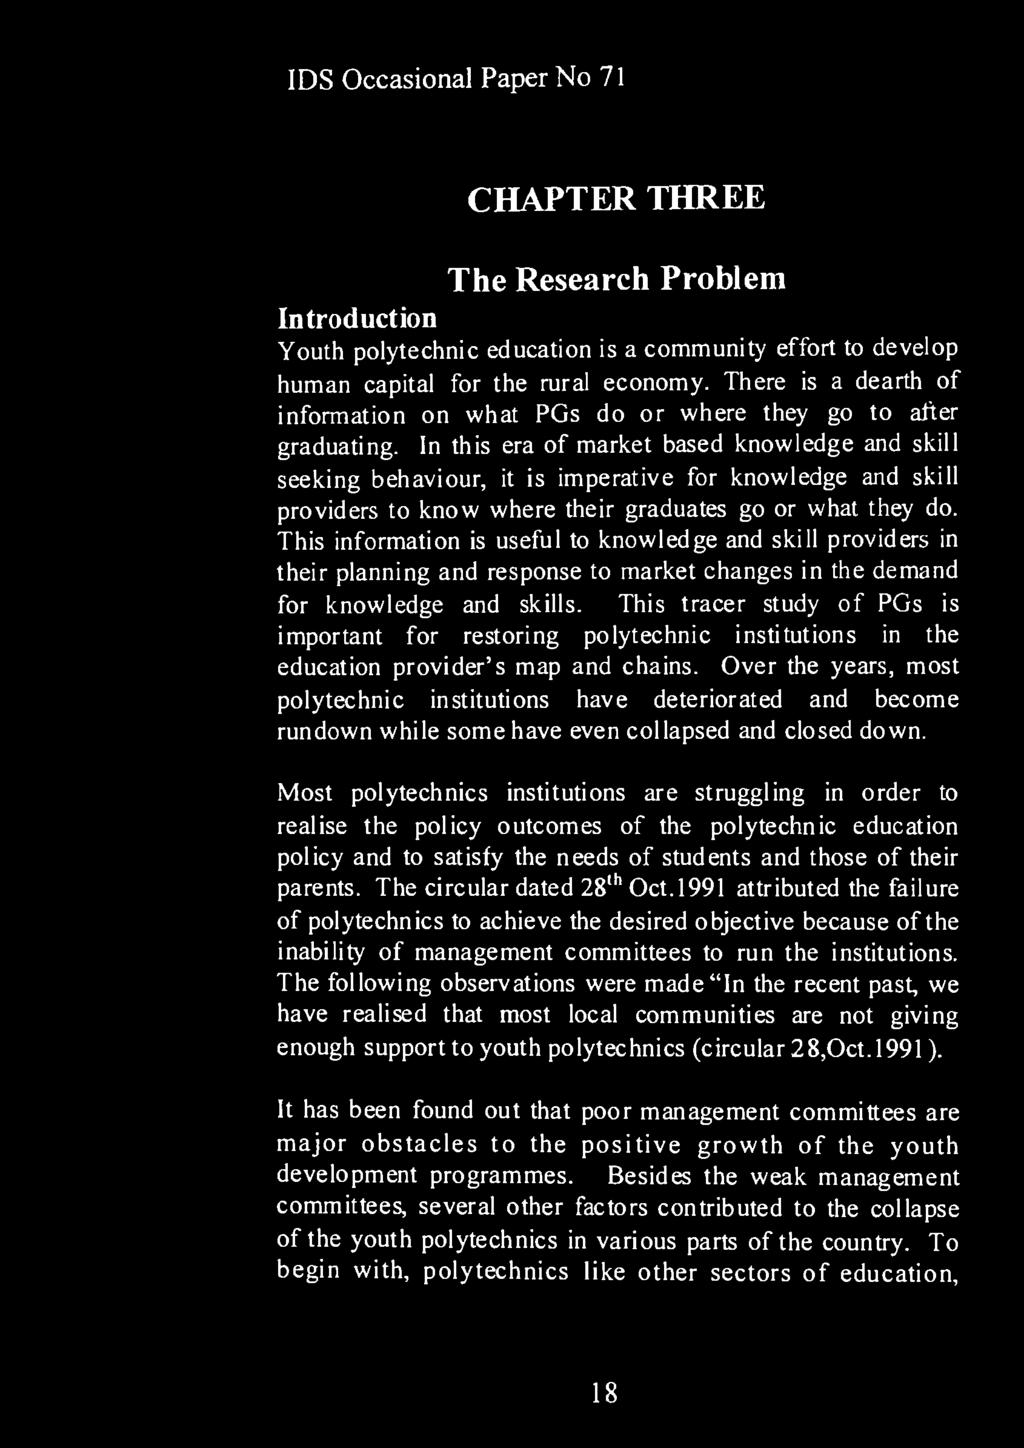 CHAPTER THREE The Research Problem Introduction Youth polytechnic education is a community effort to develop human capital for the rural economy.